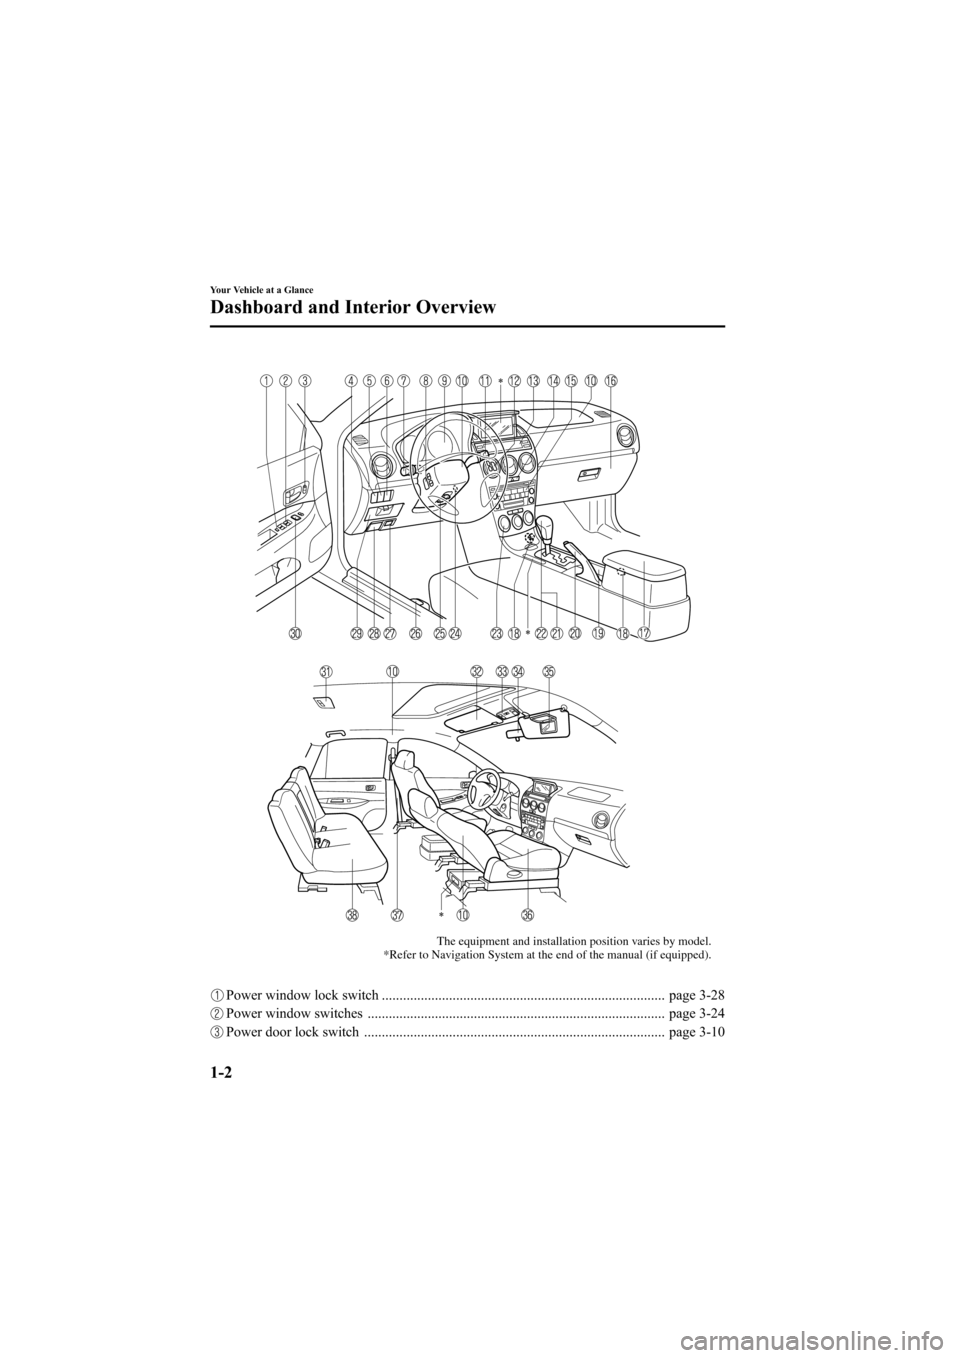 MAZDA MODEL 6 2007  Owners Manual (in English) Black plate (8,1)
The equipment and installation position varies by model.
*Refer to Navigation System at the end of the manual (if equipped).
Power window lock switch ................................